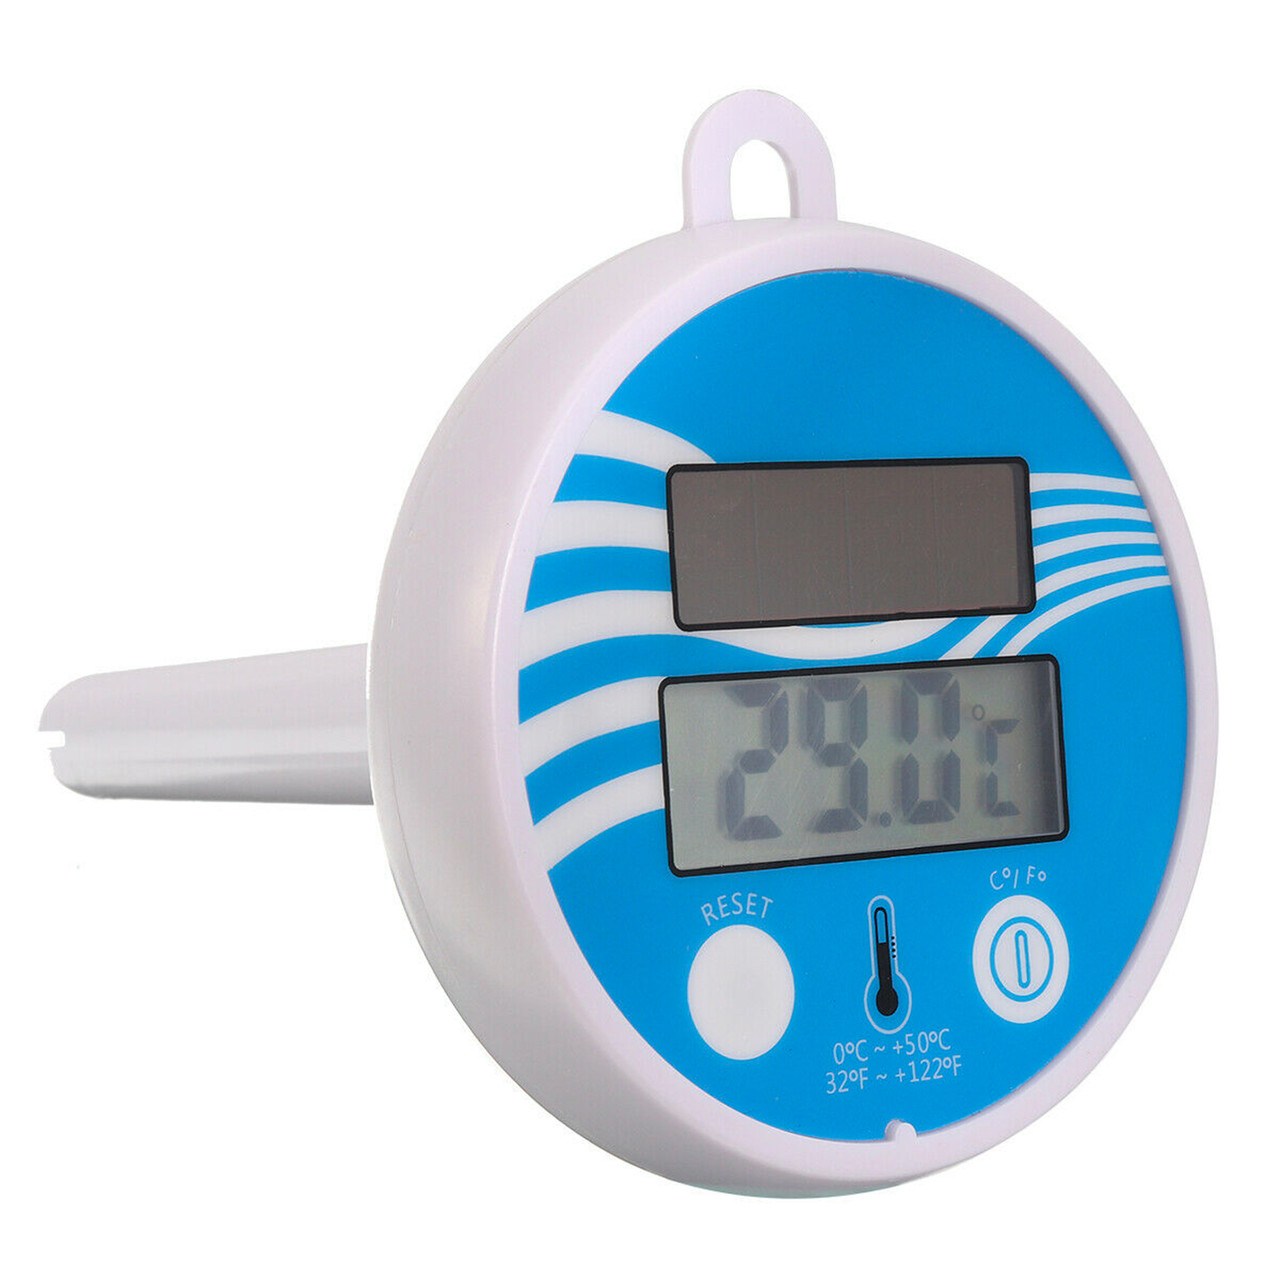 Solar Powered Floating Digital Thermometer - Westwood Pool Company